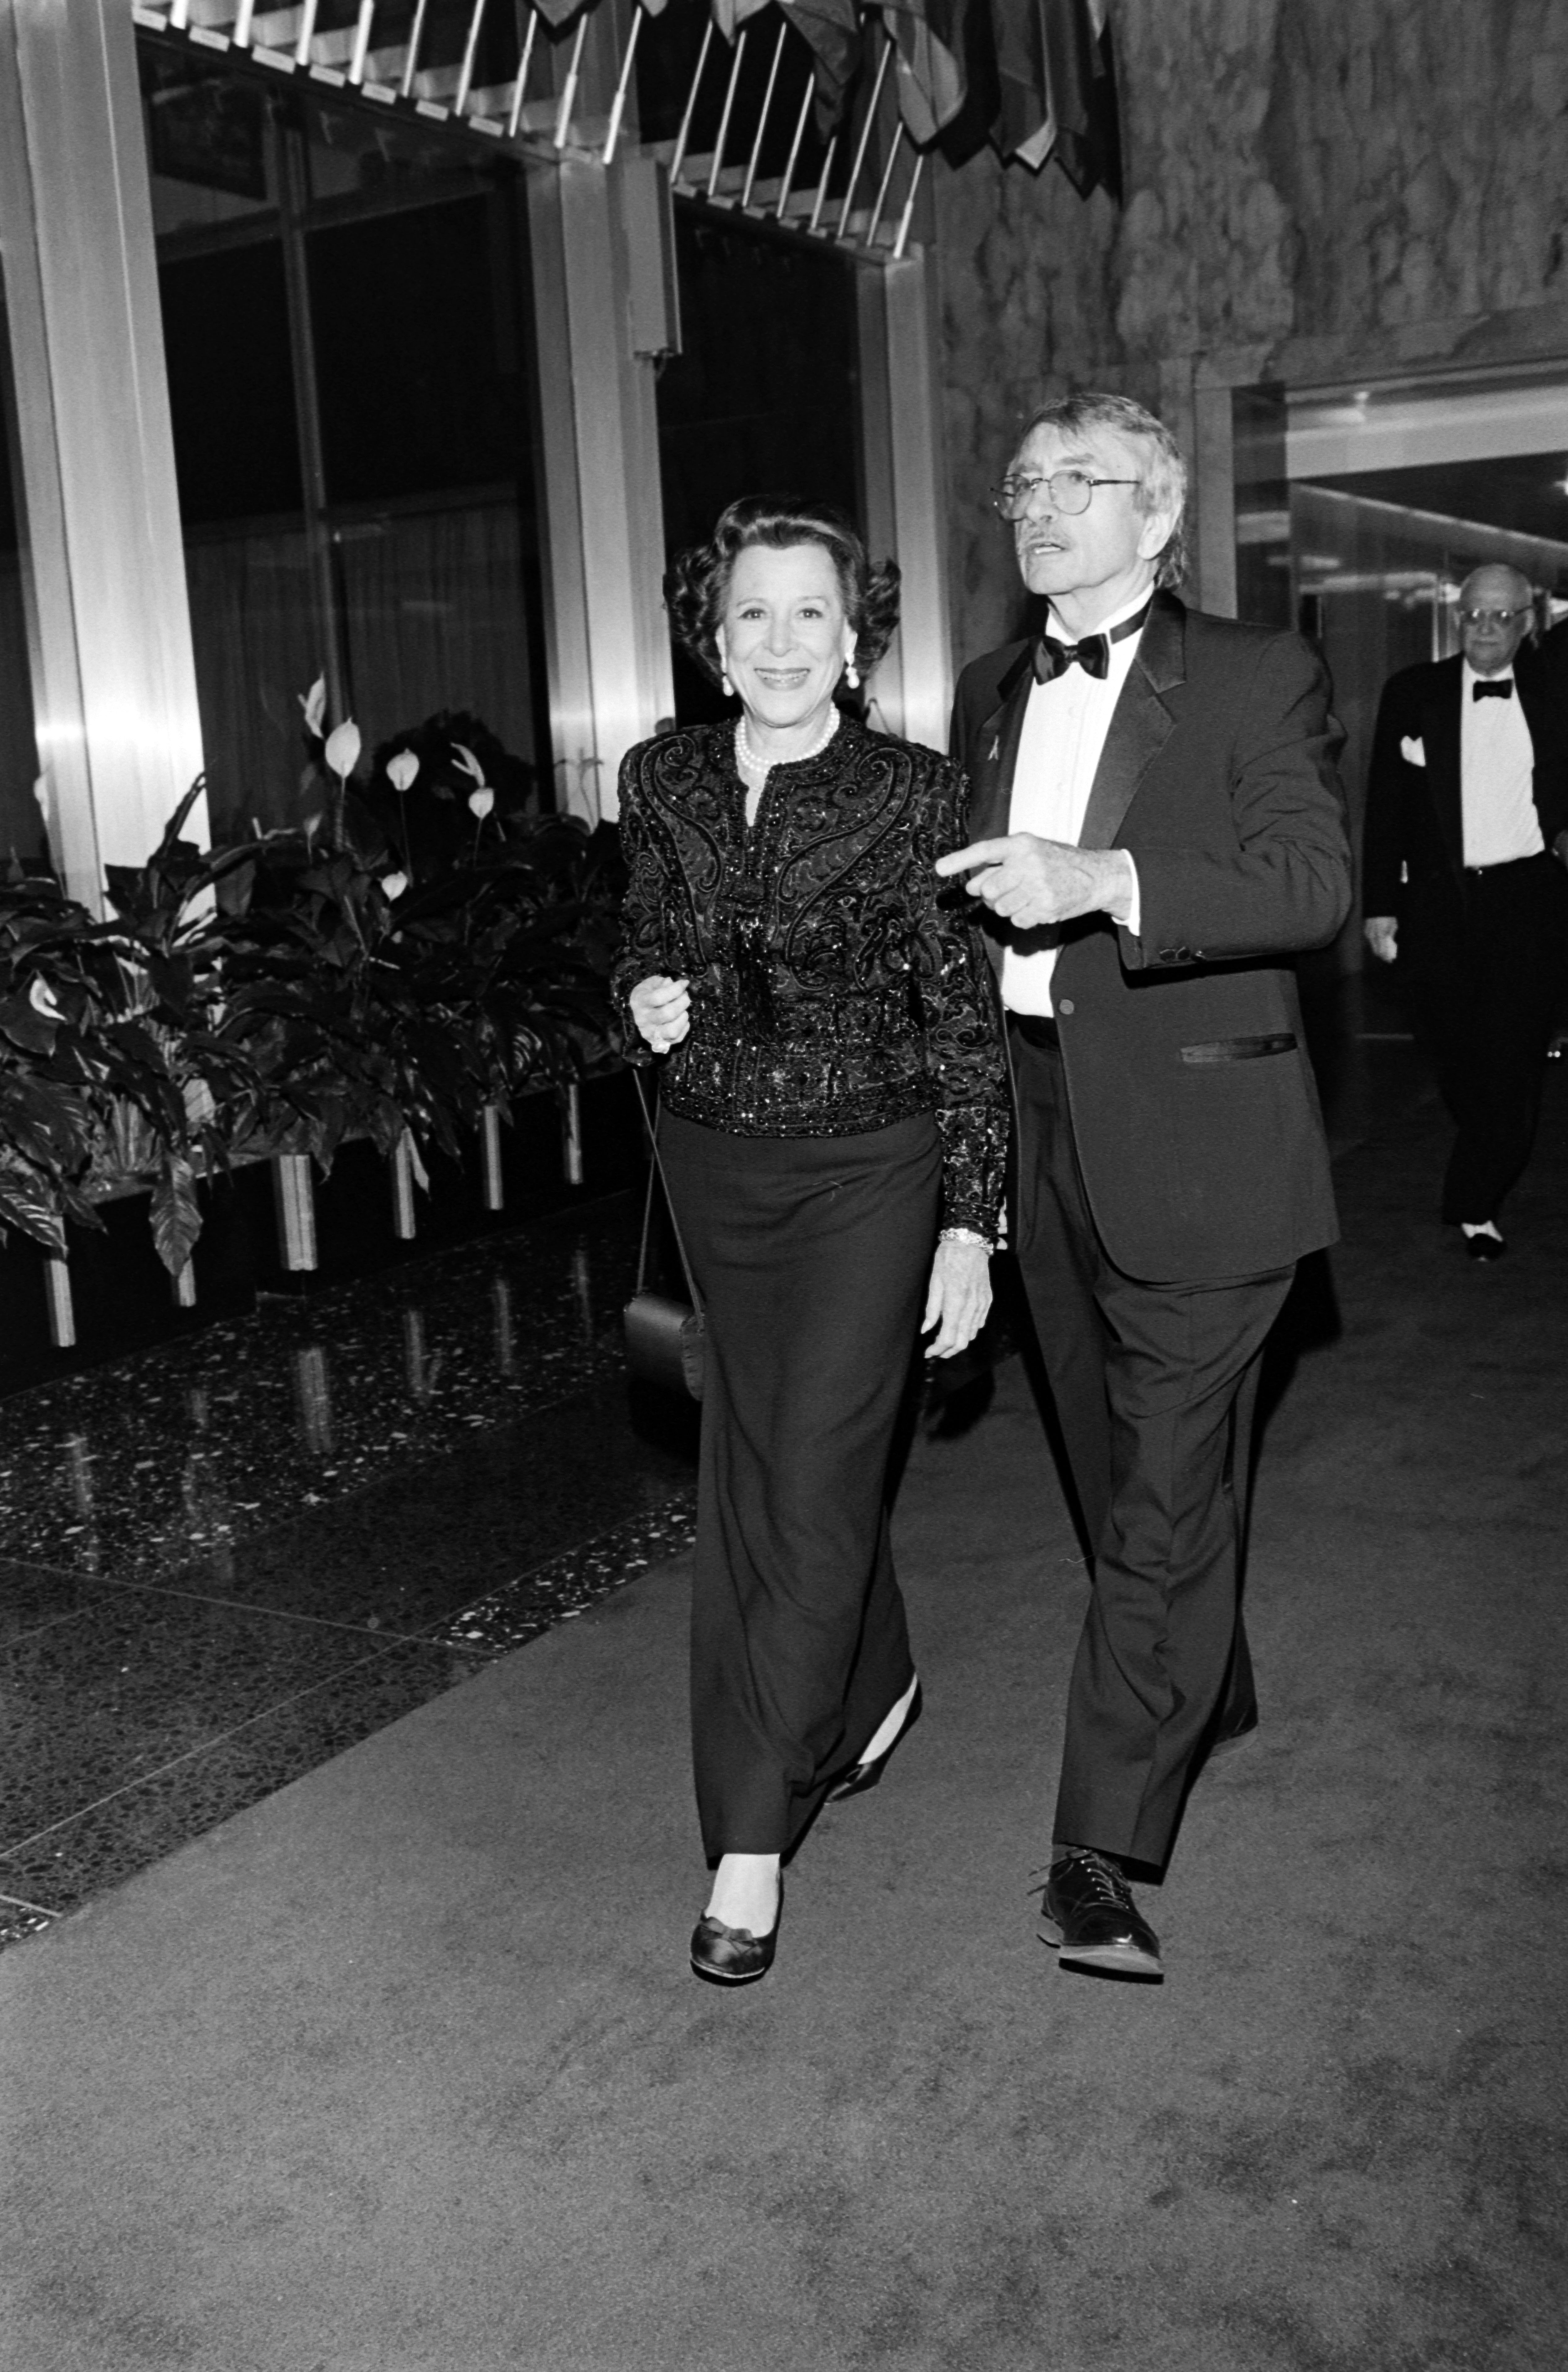 Kitty Carlisle Hart and Edward Albee at a reception for 1994 Kennedy Center Honorees at the headquarters of the U.S. Department of State on December 3, 1994, in Washington, D.C. | Source: Getty Images